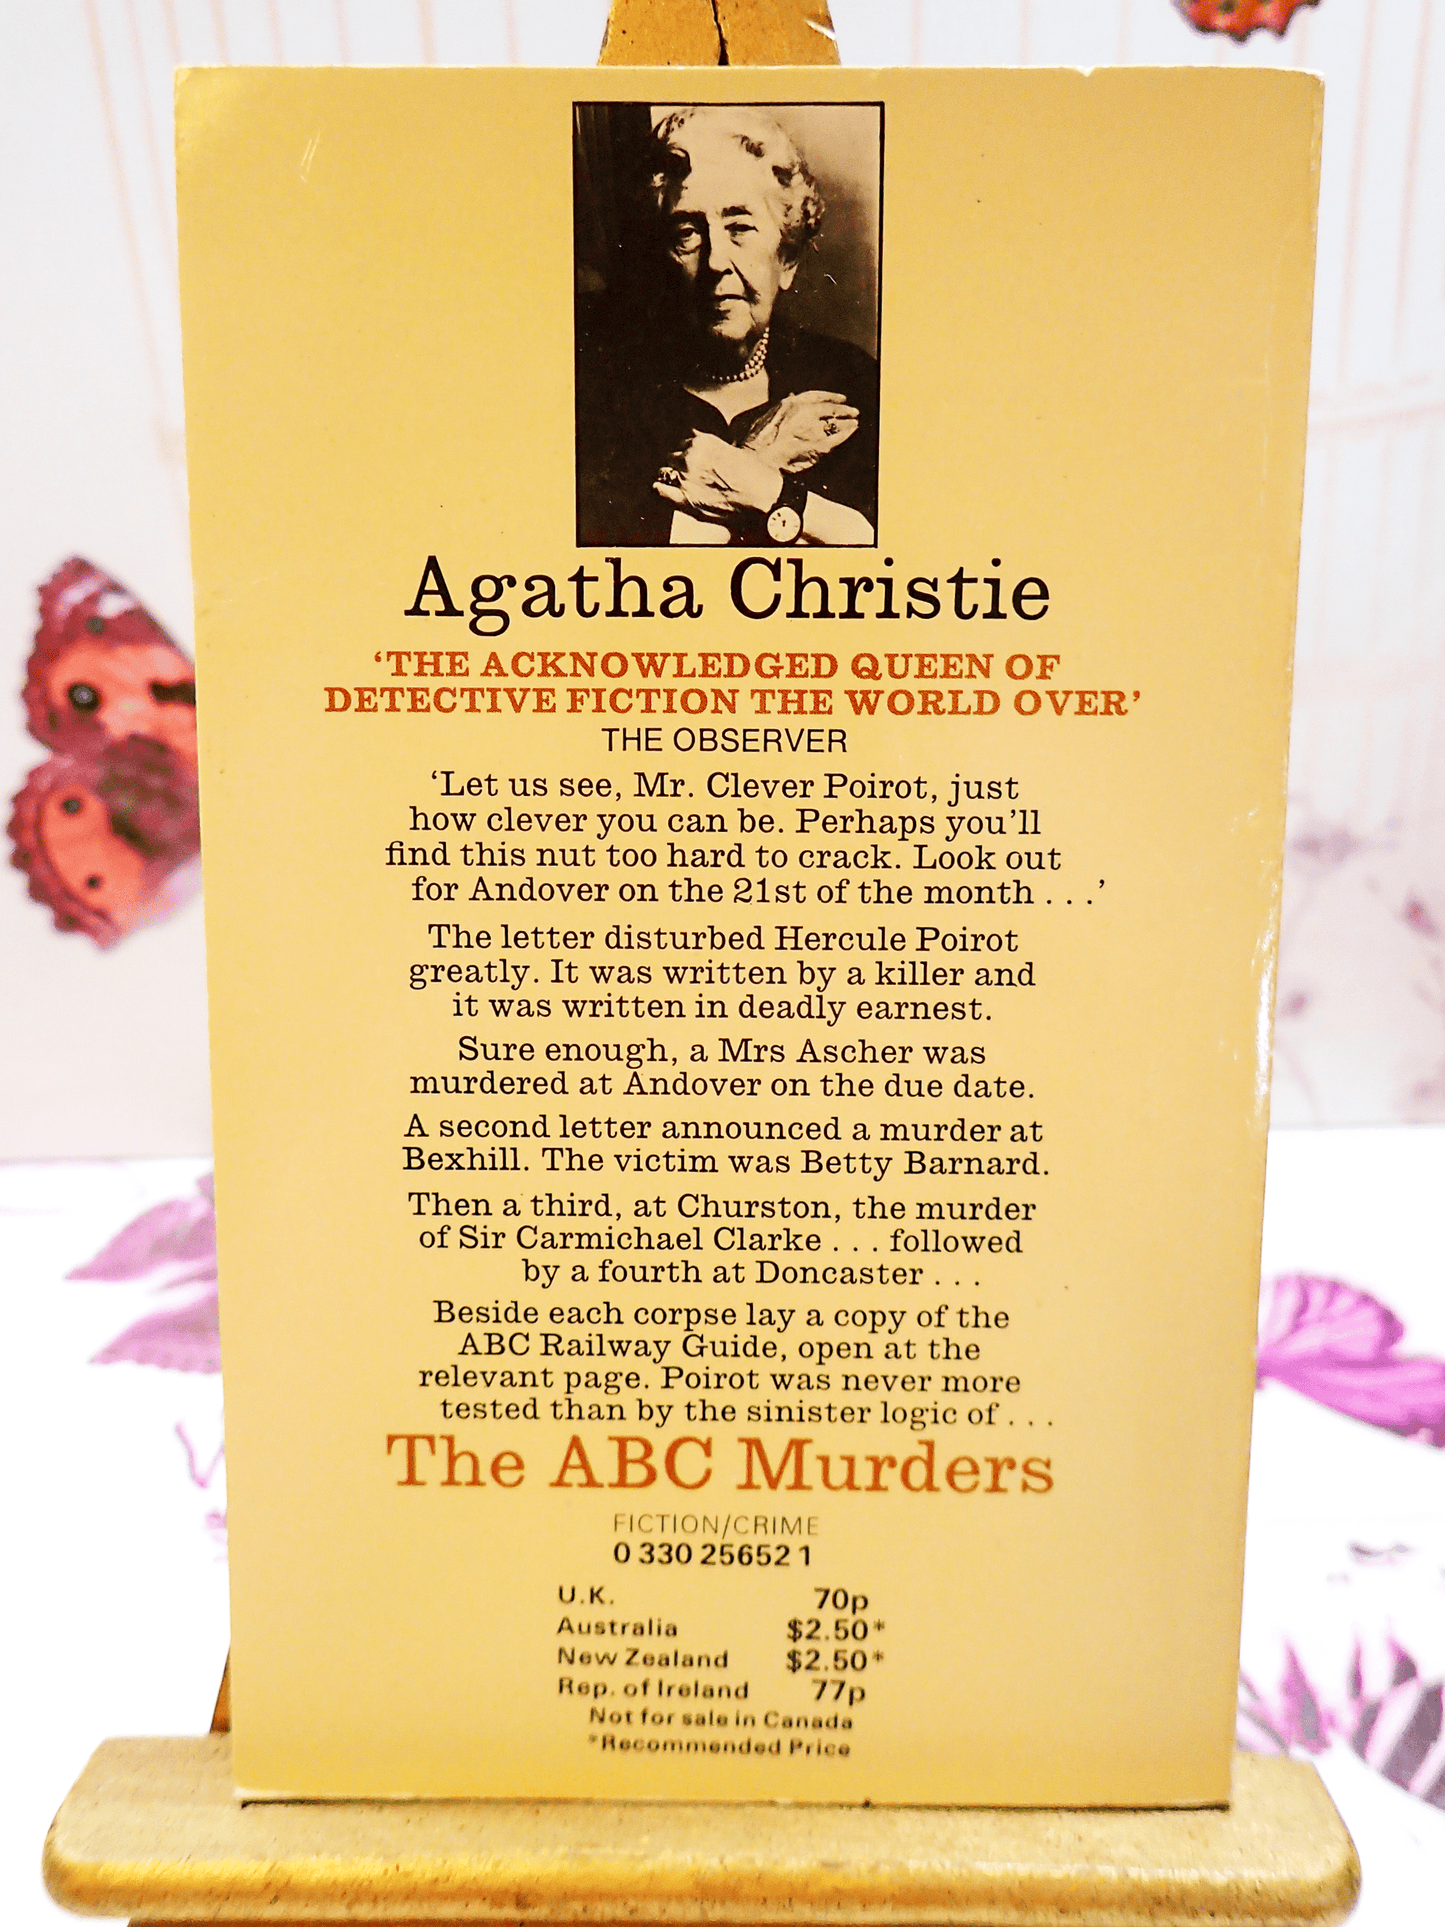 Front Cover of Agatha Christie The ABC Murders, Vintage Pan Paperback Book. Classic Crime Fiction. Showing a black and white photo of Agath Christie with book blurb: "Let us see, Mr. Clever Poirot..."